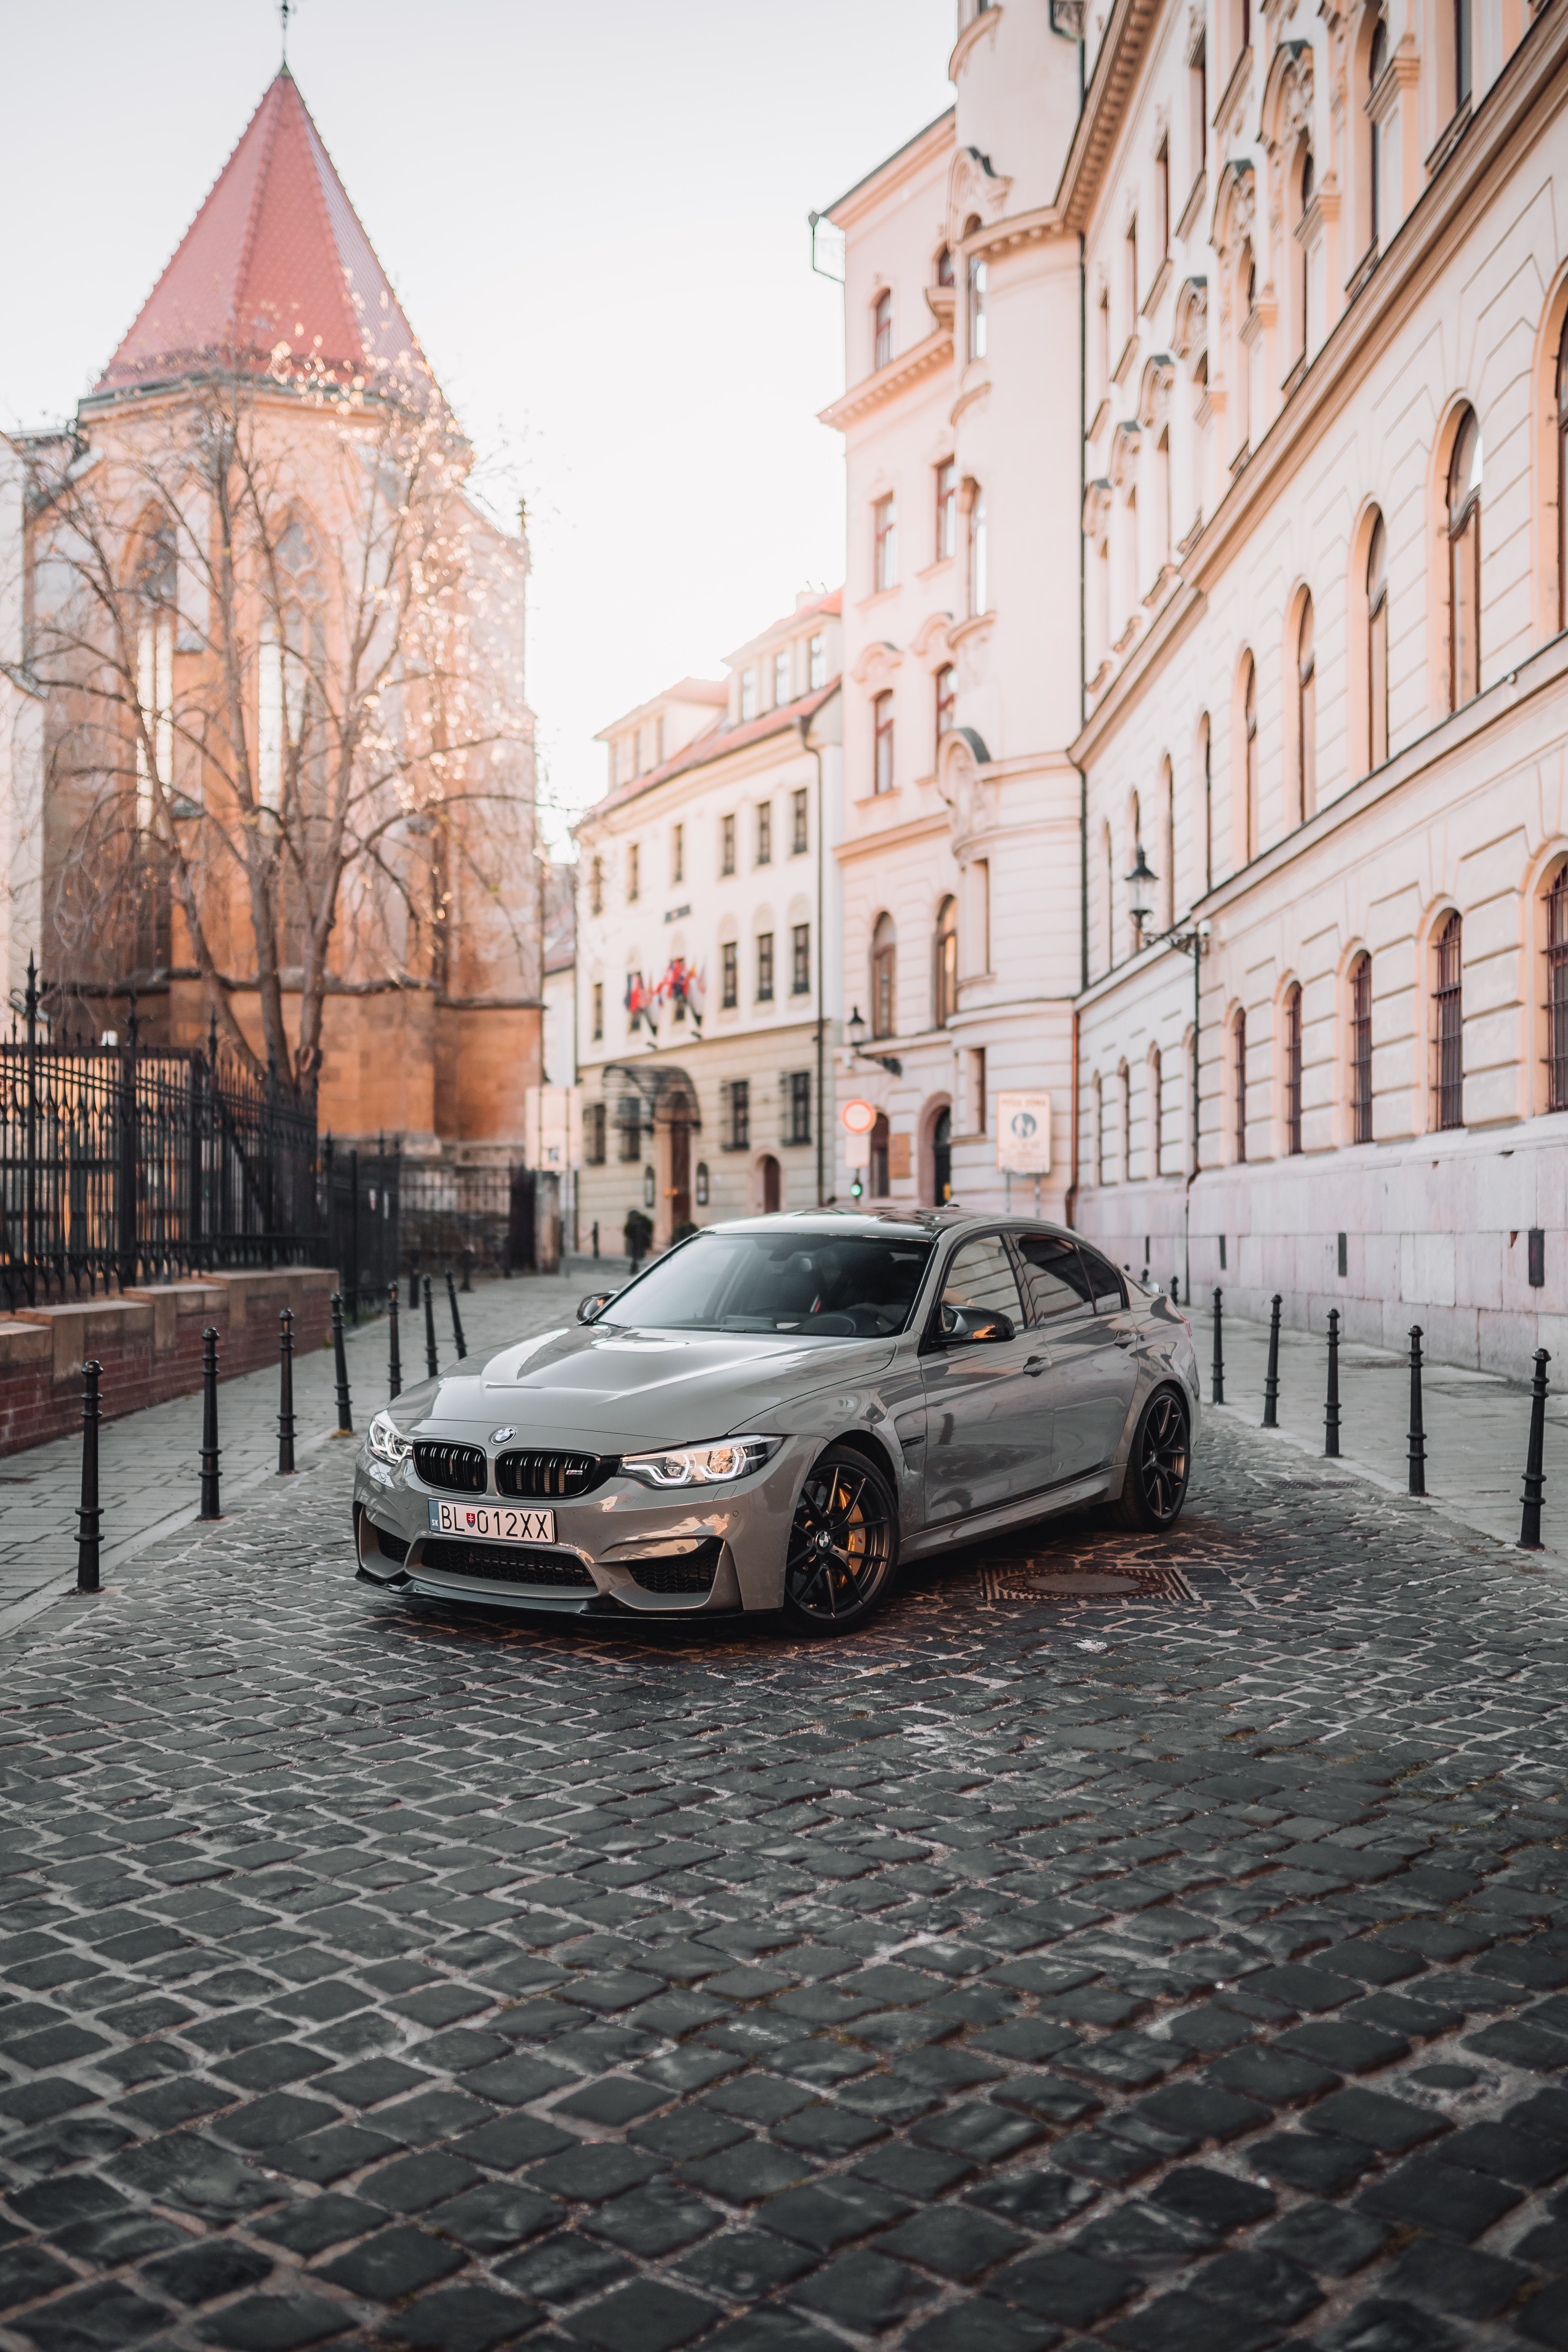 bmw, cars, front view, grey, street 2160p